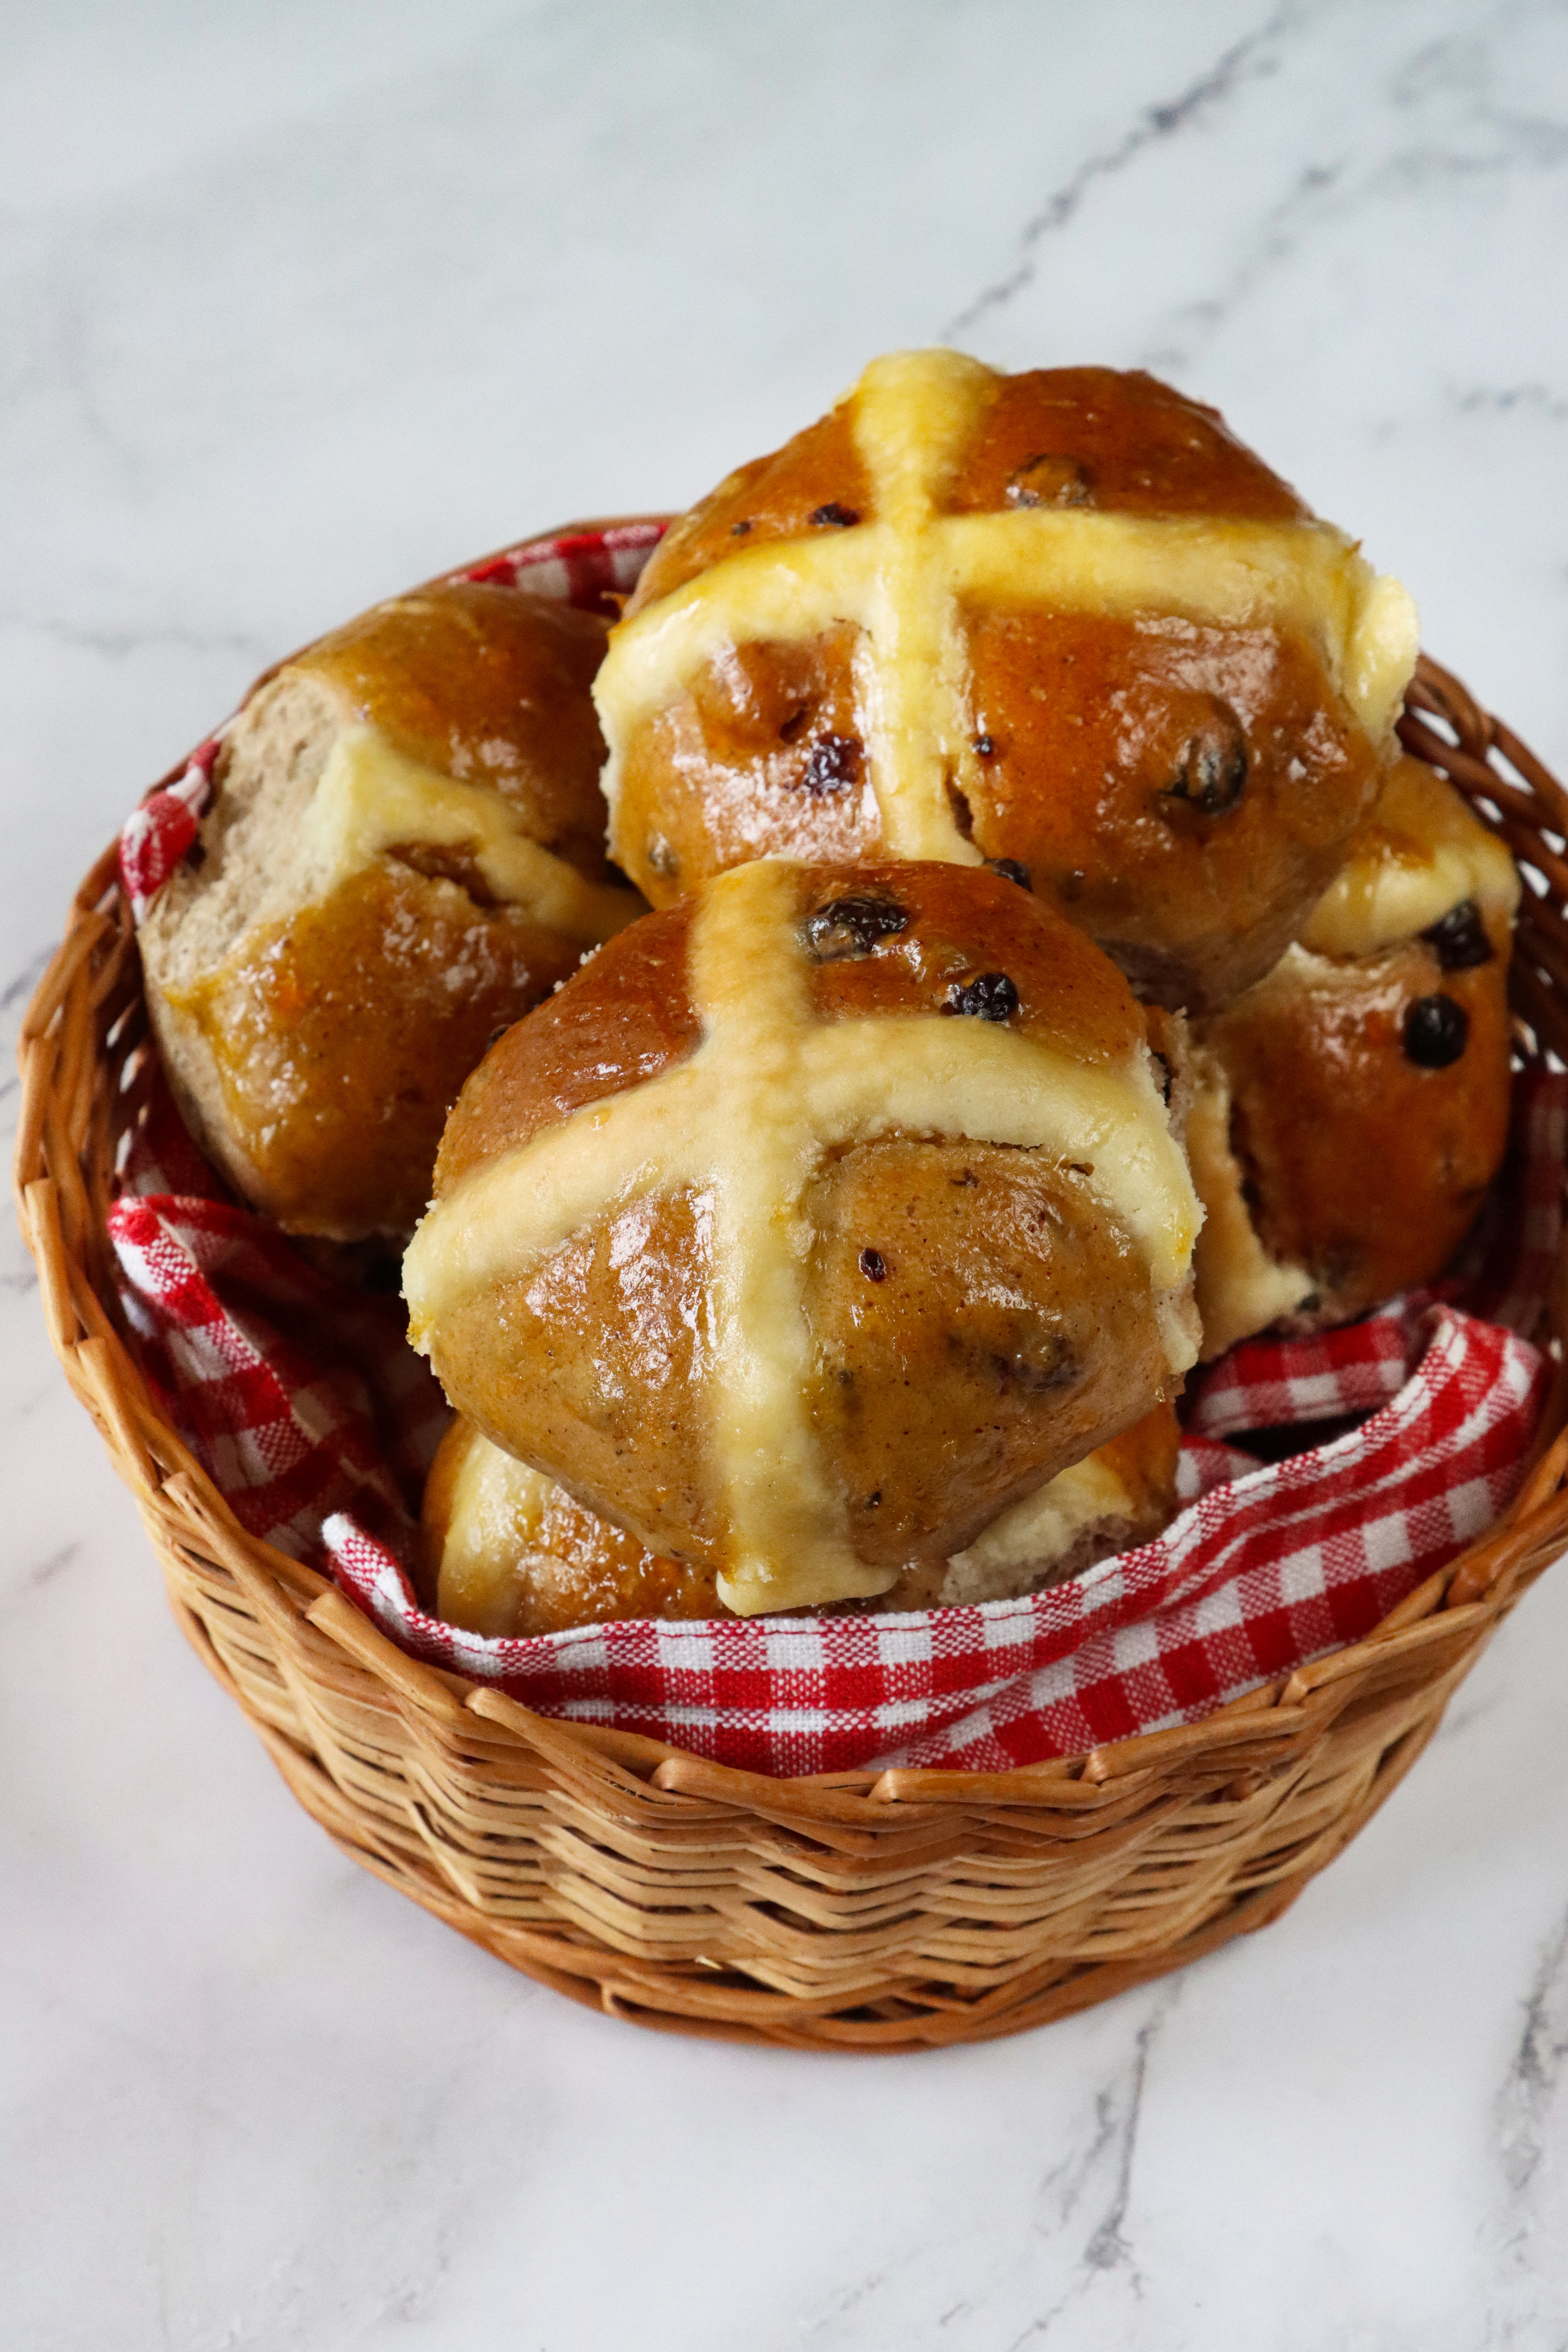 pile of freshly baked, homemade hot cross buns in a wicker basket lined with a red and white gingham cloth, home baking concept